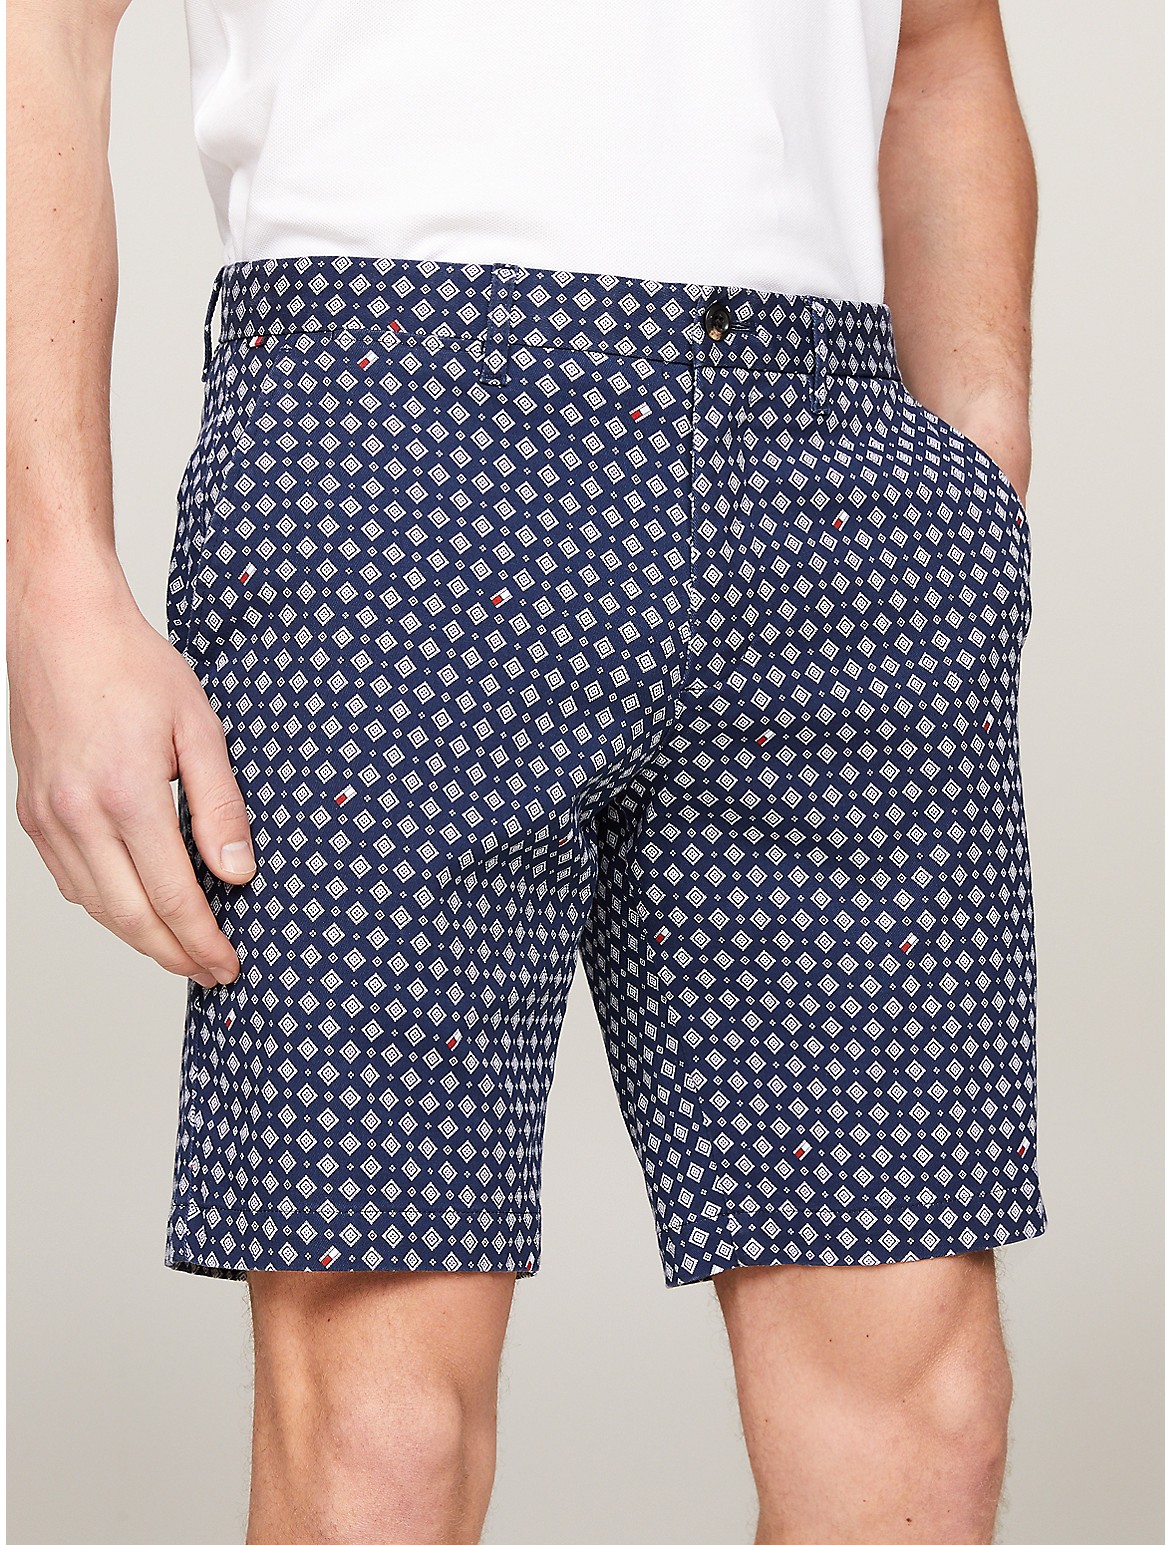 Tommy Hilfiger Men's Straight Fit Printed 9" Twill Short - Blue - 32